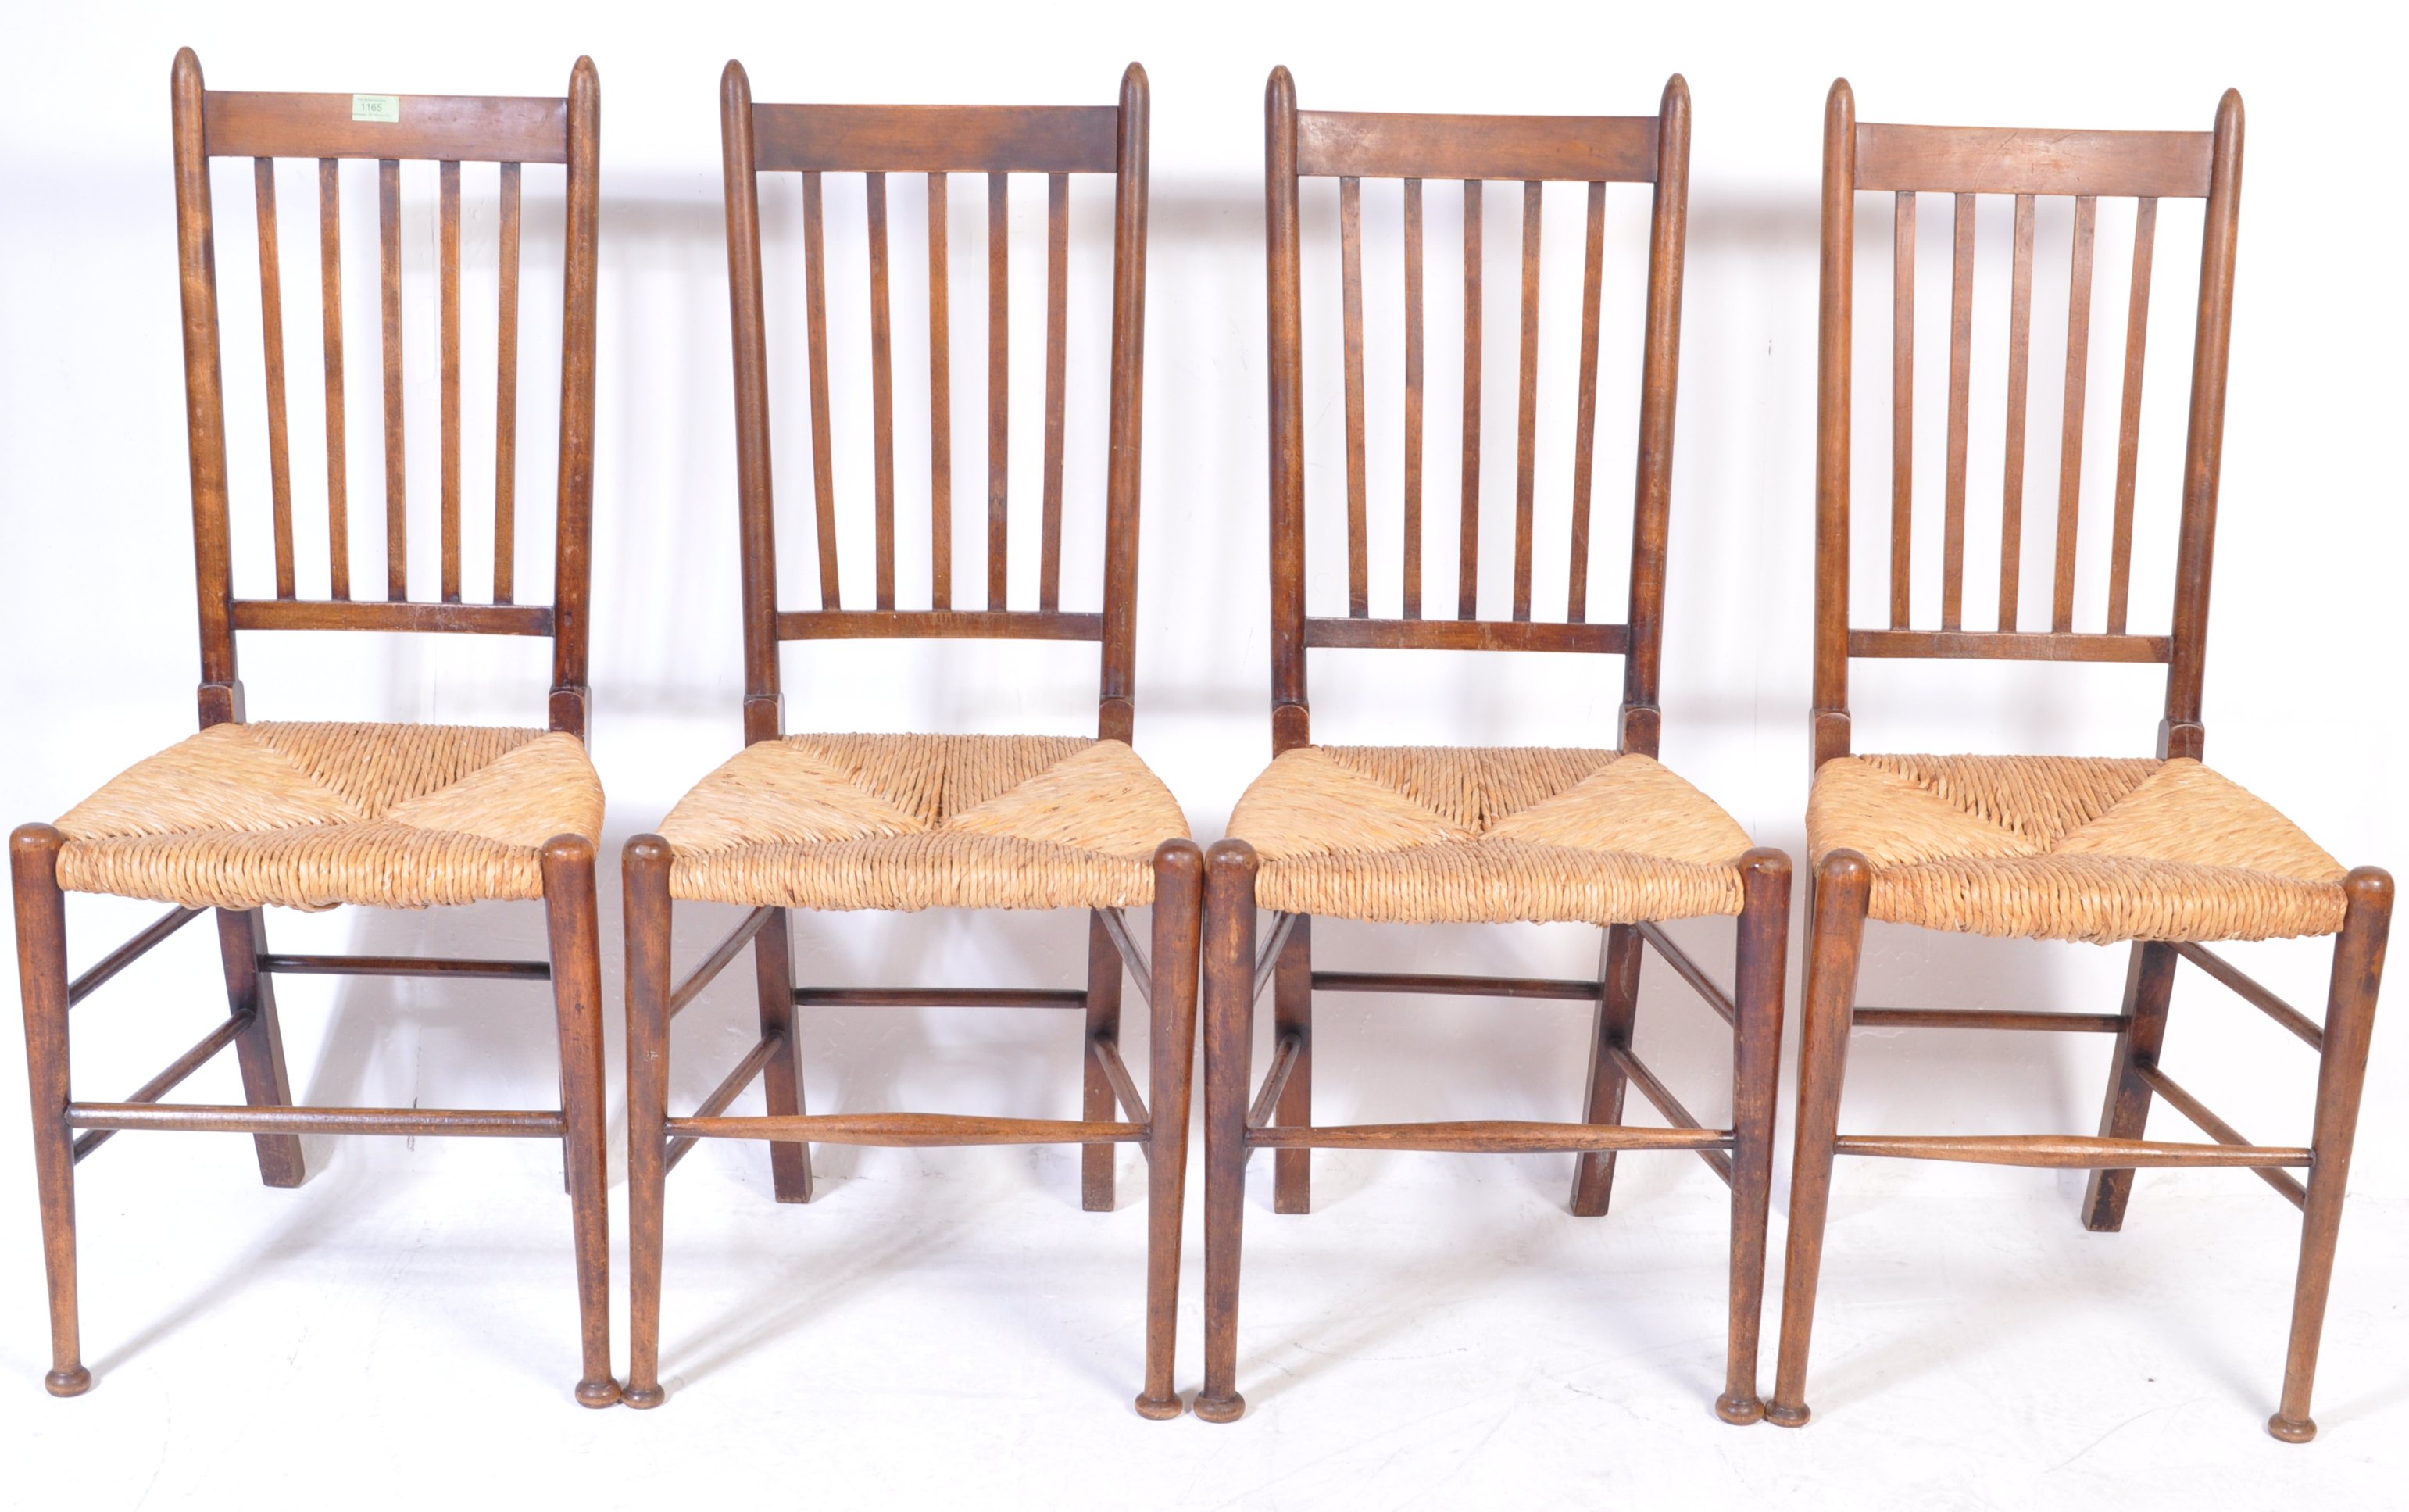 FOUR VINTAGE MID 20TH CENTURY COUNTRY FARM HOUSE CHAIRS - Image 2 of 7